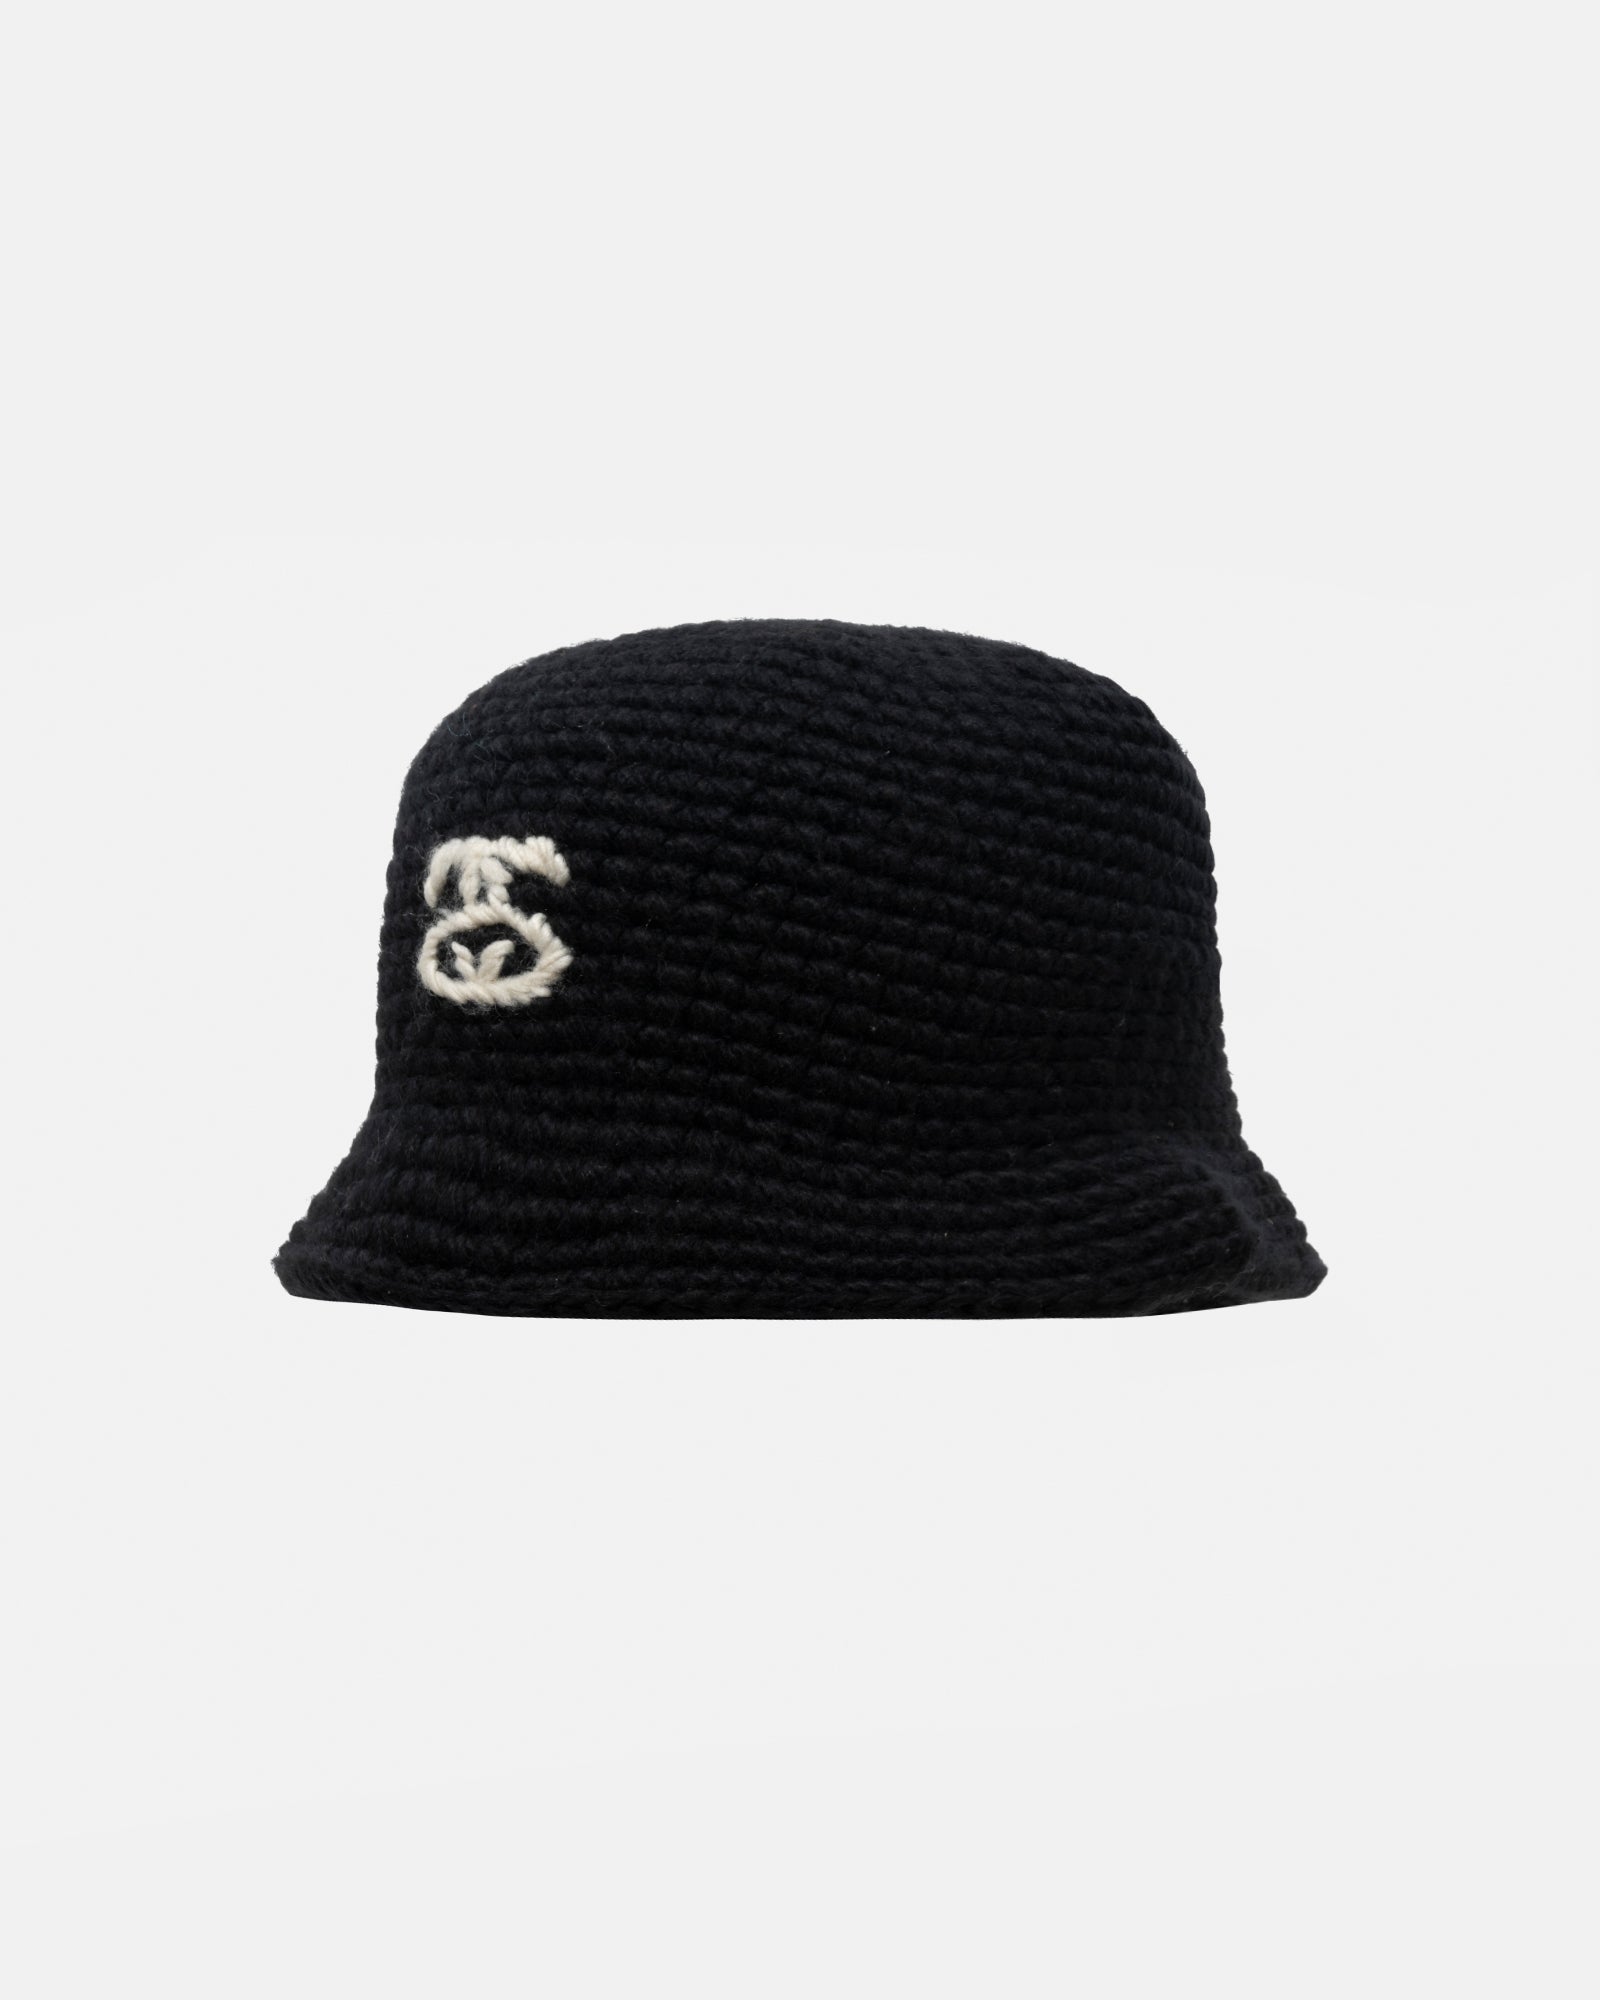 Stussy SS LINK KNIT BUCKET HAT バケットハット